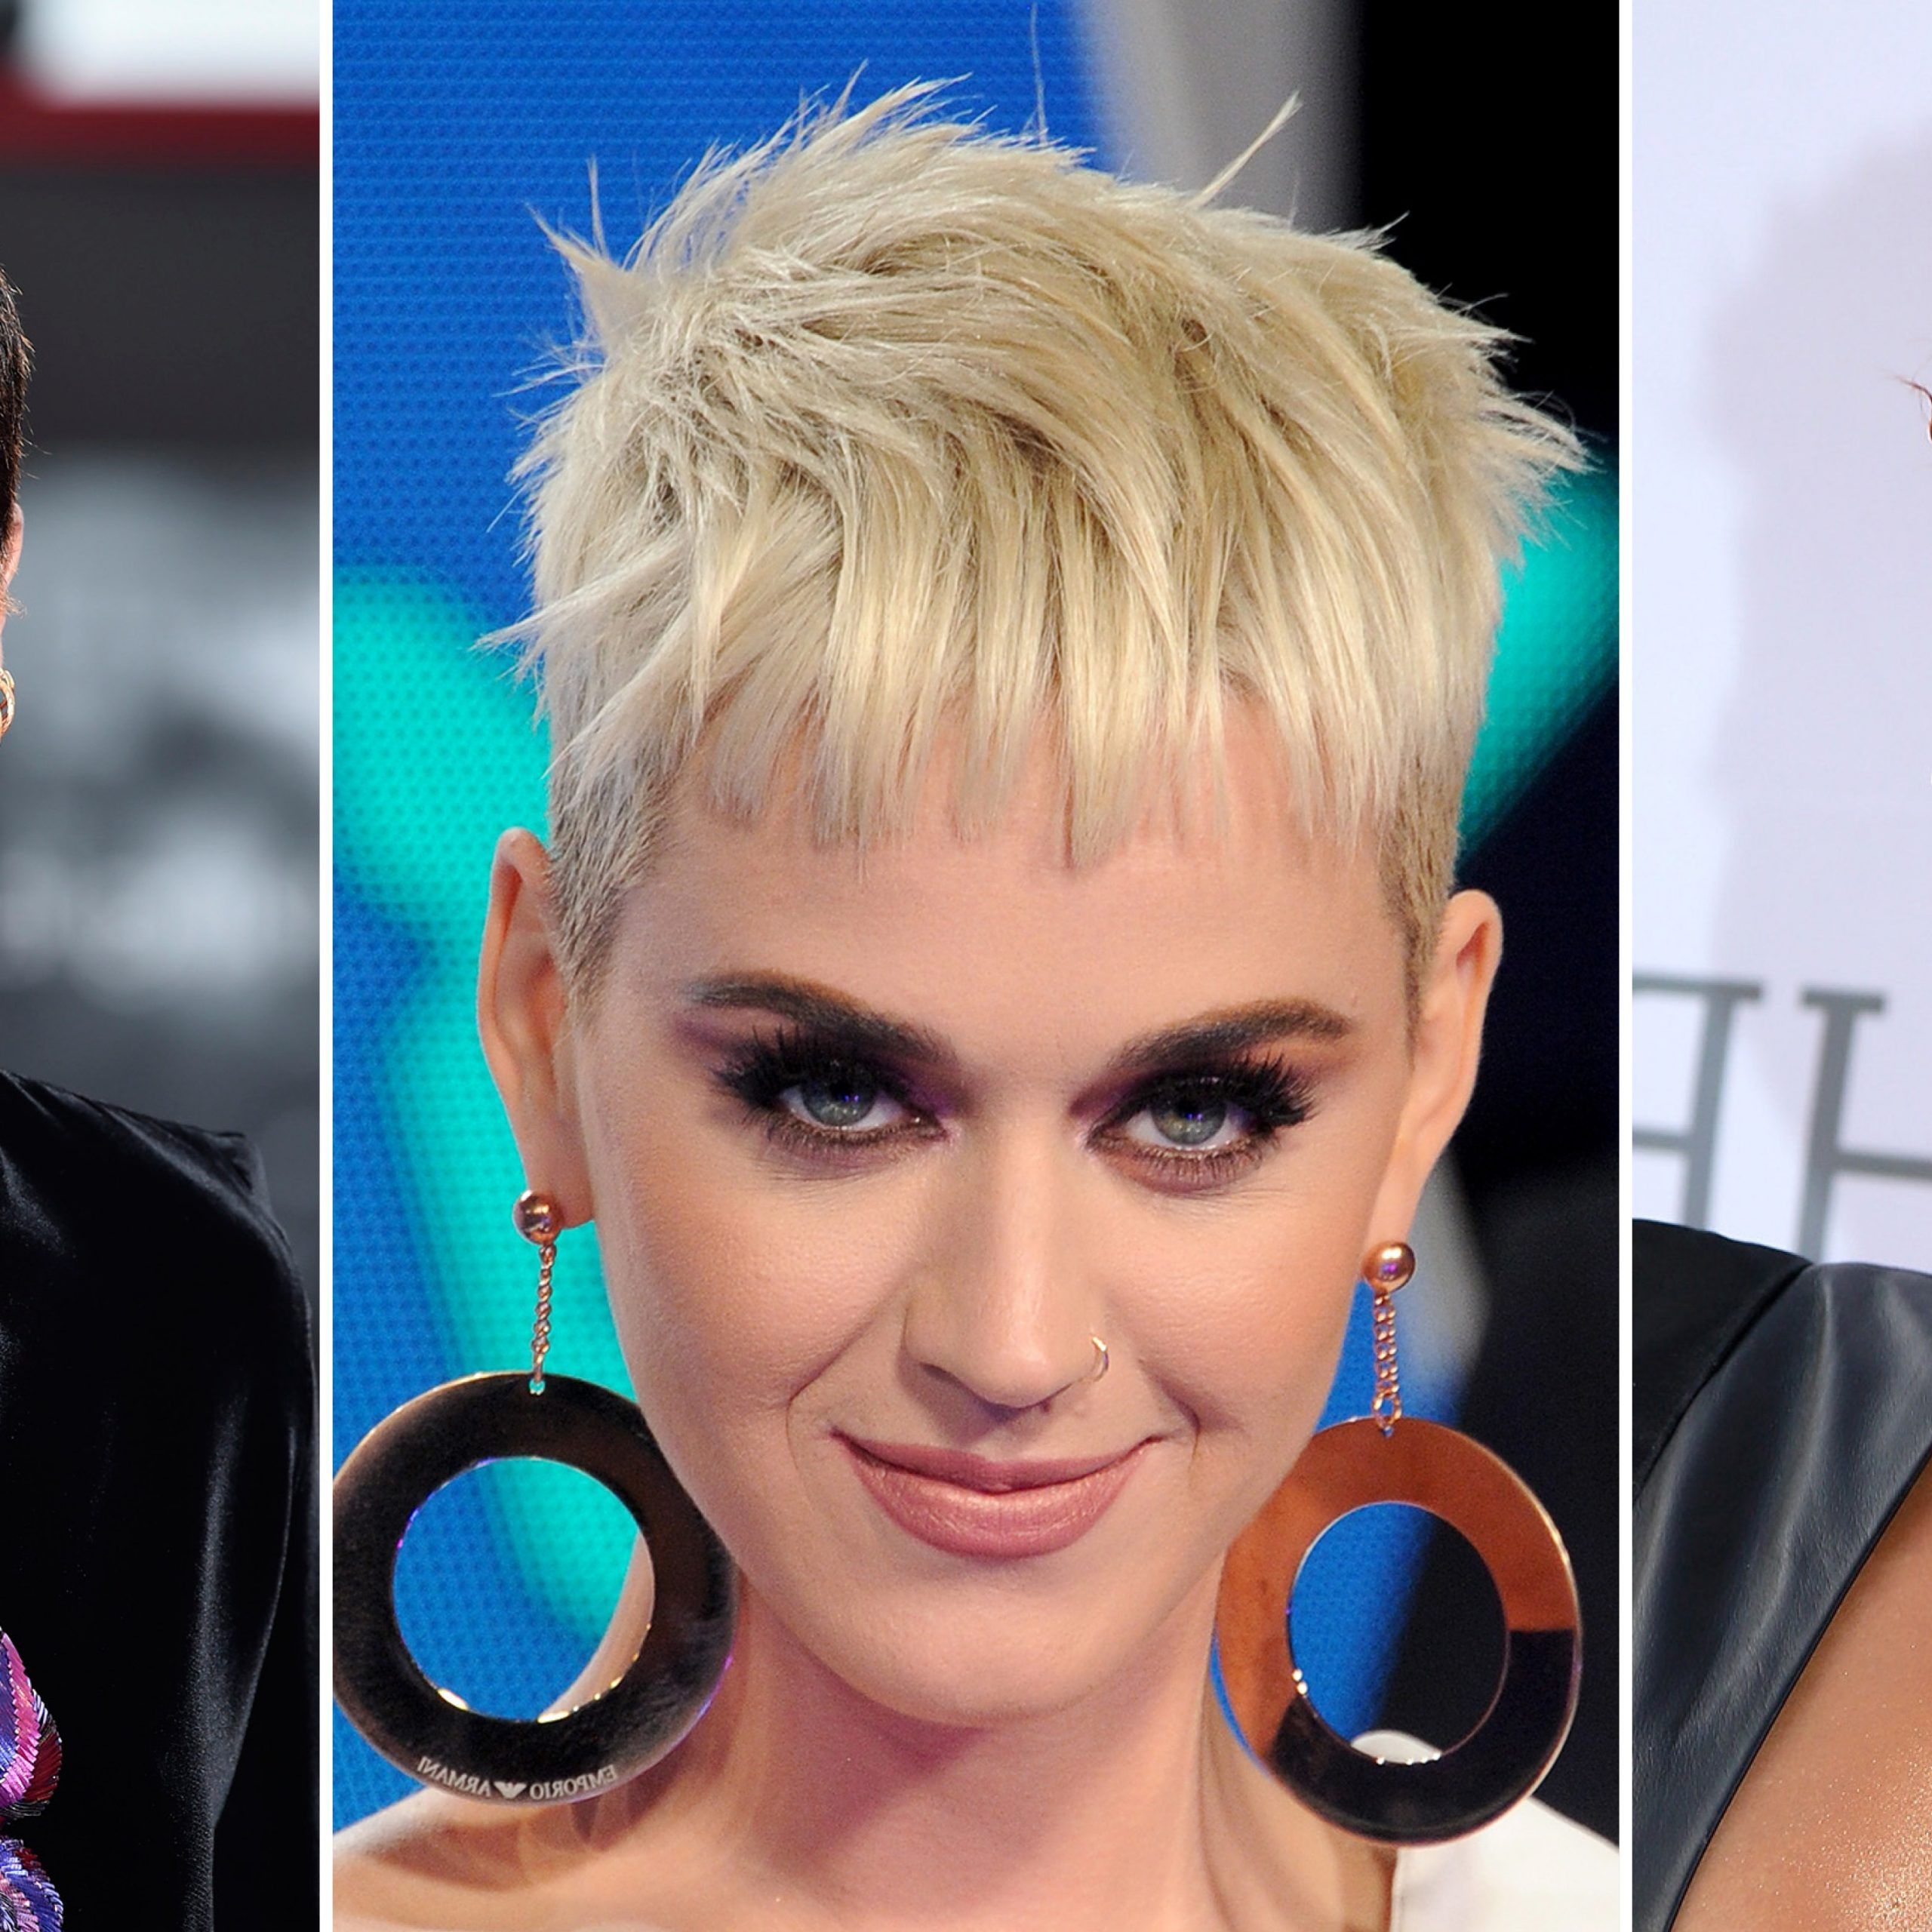 19 Best Pixie Cuts Of 2019 – Celebrity Pixie Hairstyle Ideas | Allure Pertaining To Voluminous Pixie Hairstyles With Wavy Texture (View 14 of 20)